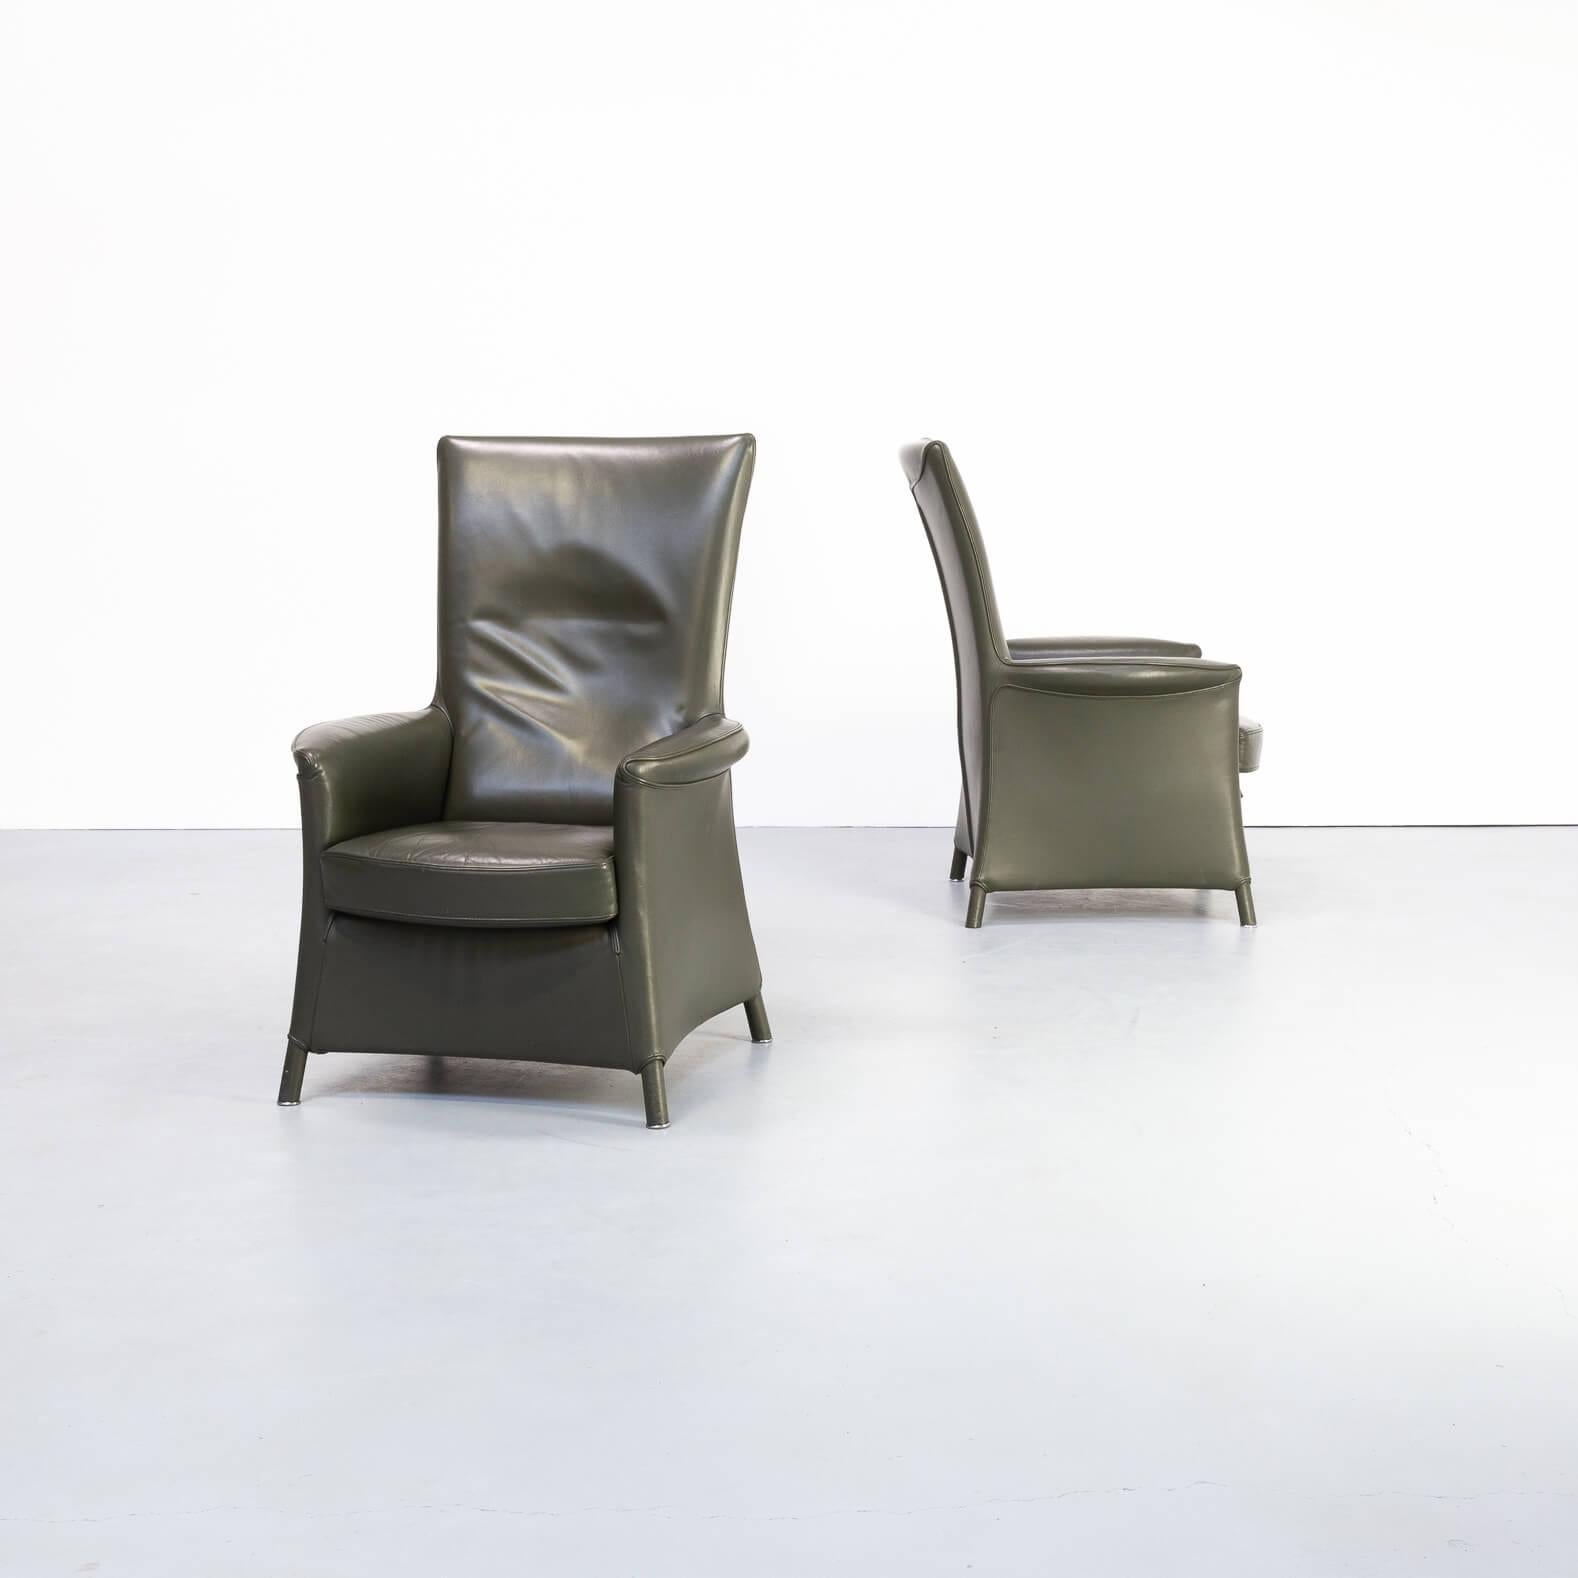 Piva has not only created designs for many renowned furniture companies, but also for numerous impressive buildings. For Wittmann Paolo designed several design classics. Also this set of two ‘Alta’ Lounge fauteuils in the early nineties. Highly